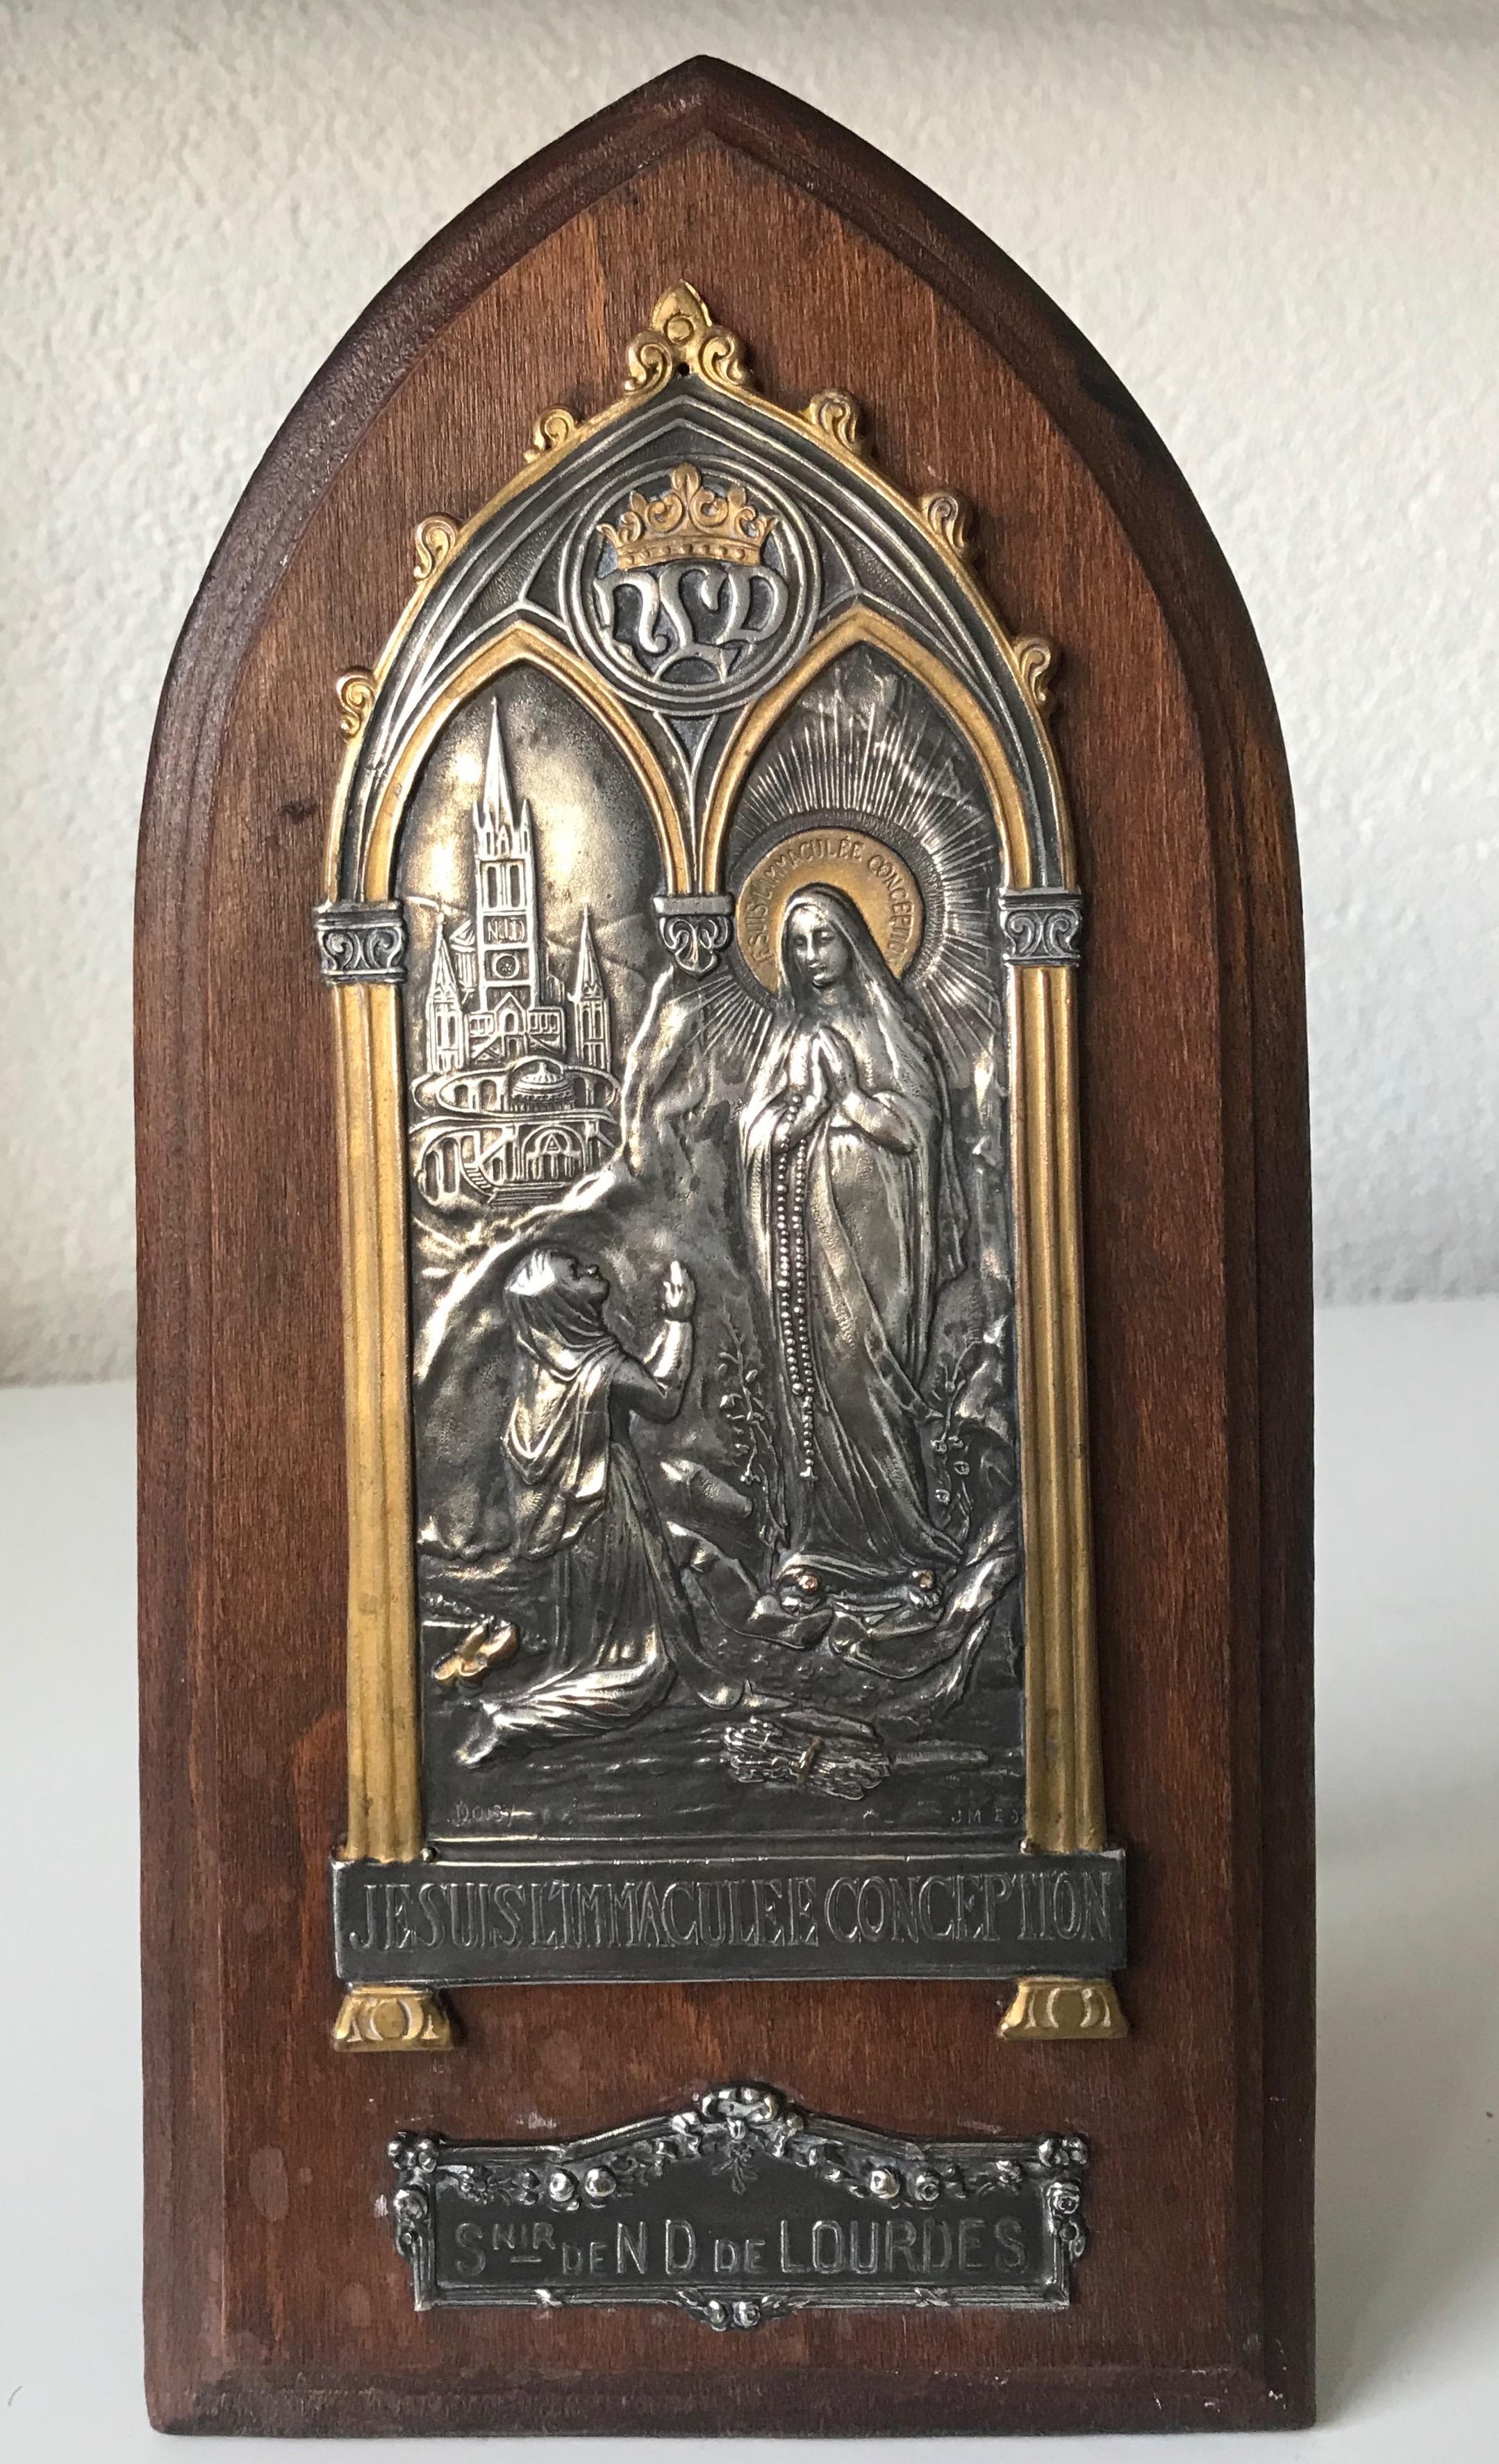 Early 1900, Gothic Revival signed plaque of 'Notre Dame de Lourdes' with musical movement.

Notre Dame de Lourdes is French for 